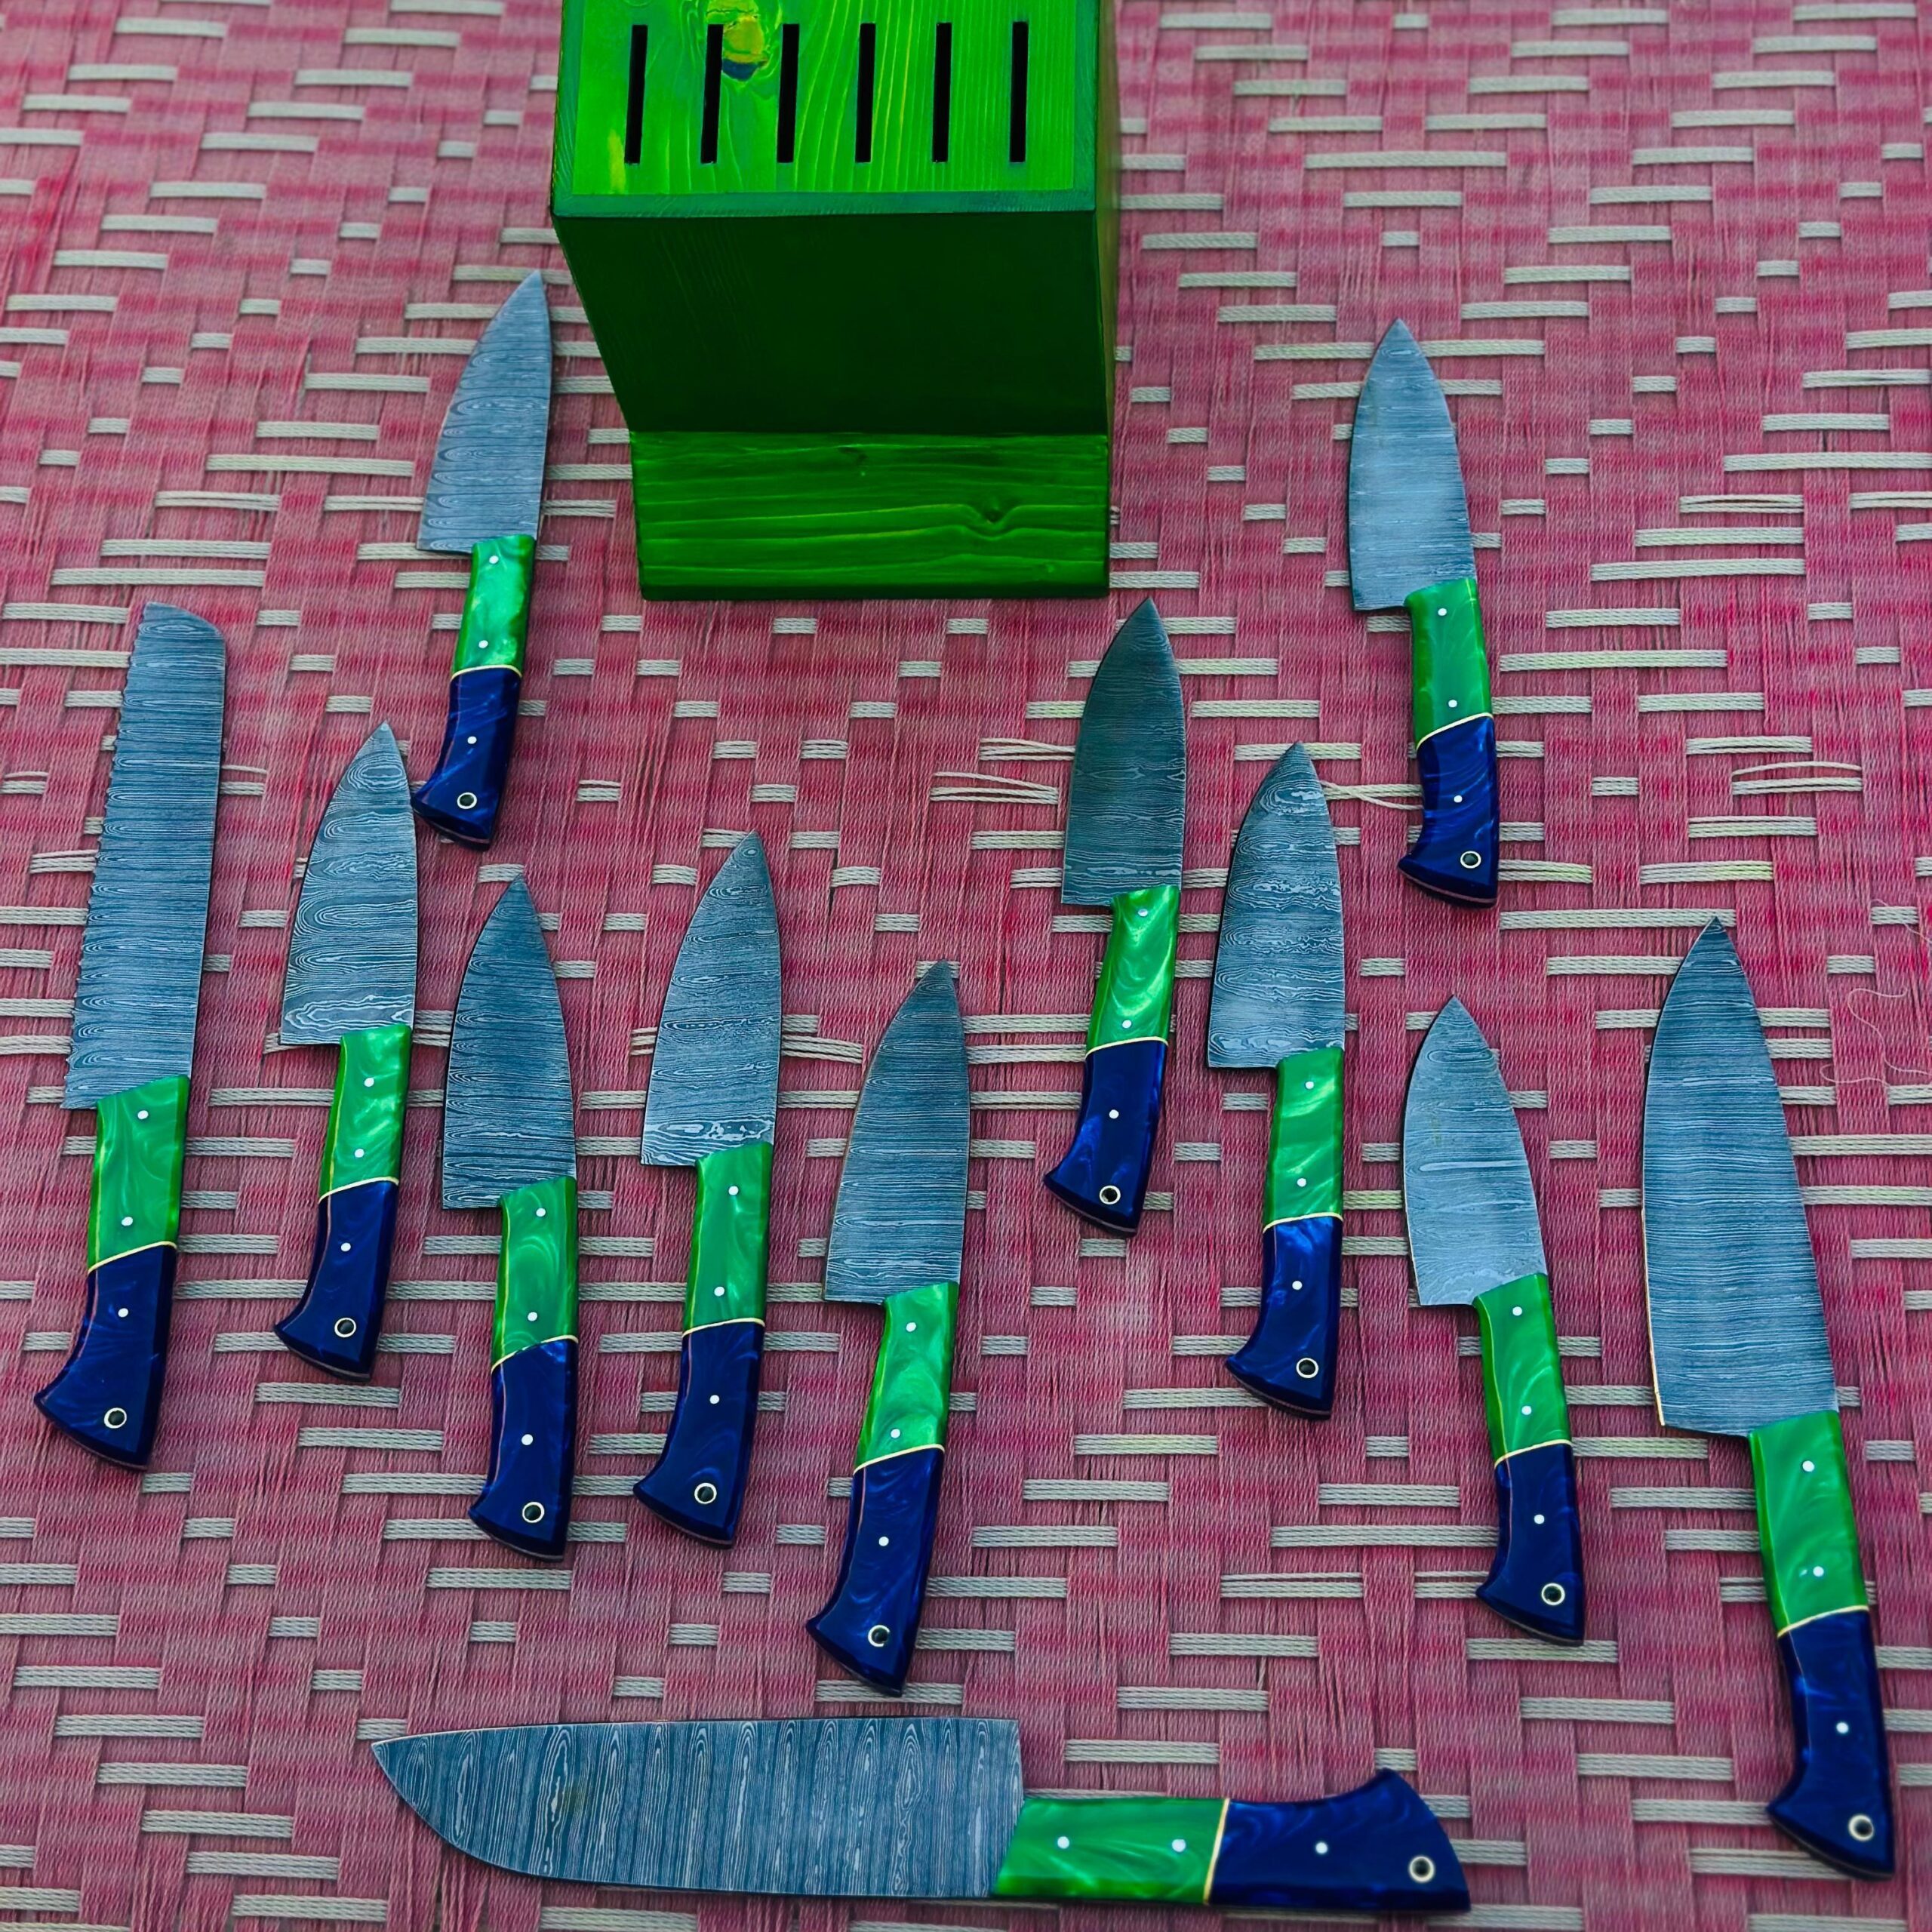 Customizable knives, hunting knives, fishing knives, folding knives, everyday carry knives, outdoor knives, camping knives, chef knives, Bowie knives, axes, hammers, swords, cross pendants, sword pendants, axe pendants, Damascus steel rings, couple rings, men's rings, Damascus steel pens, keychains